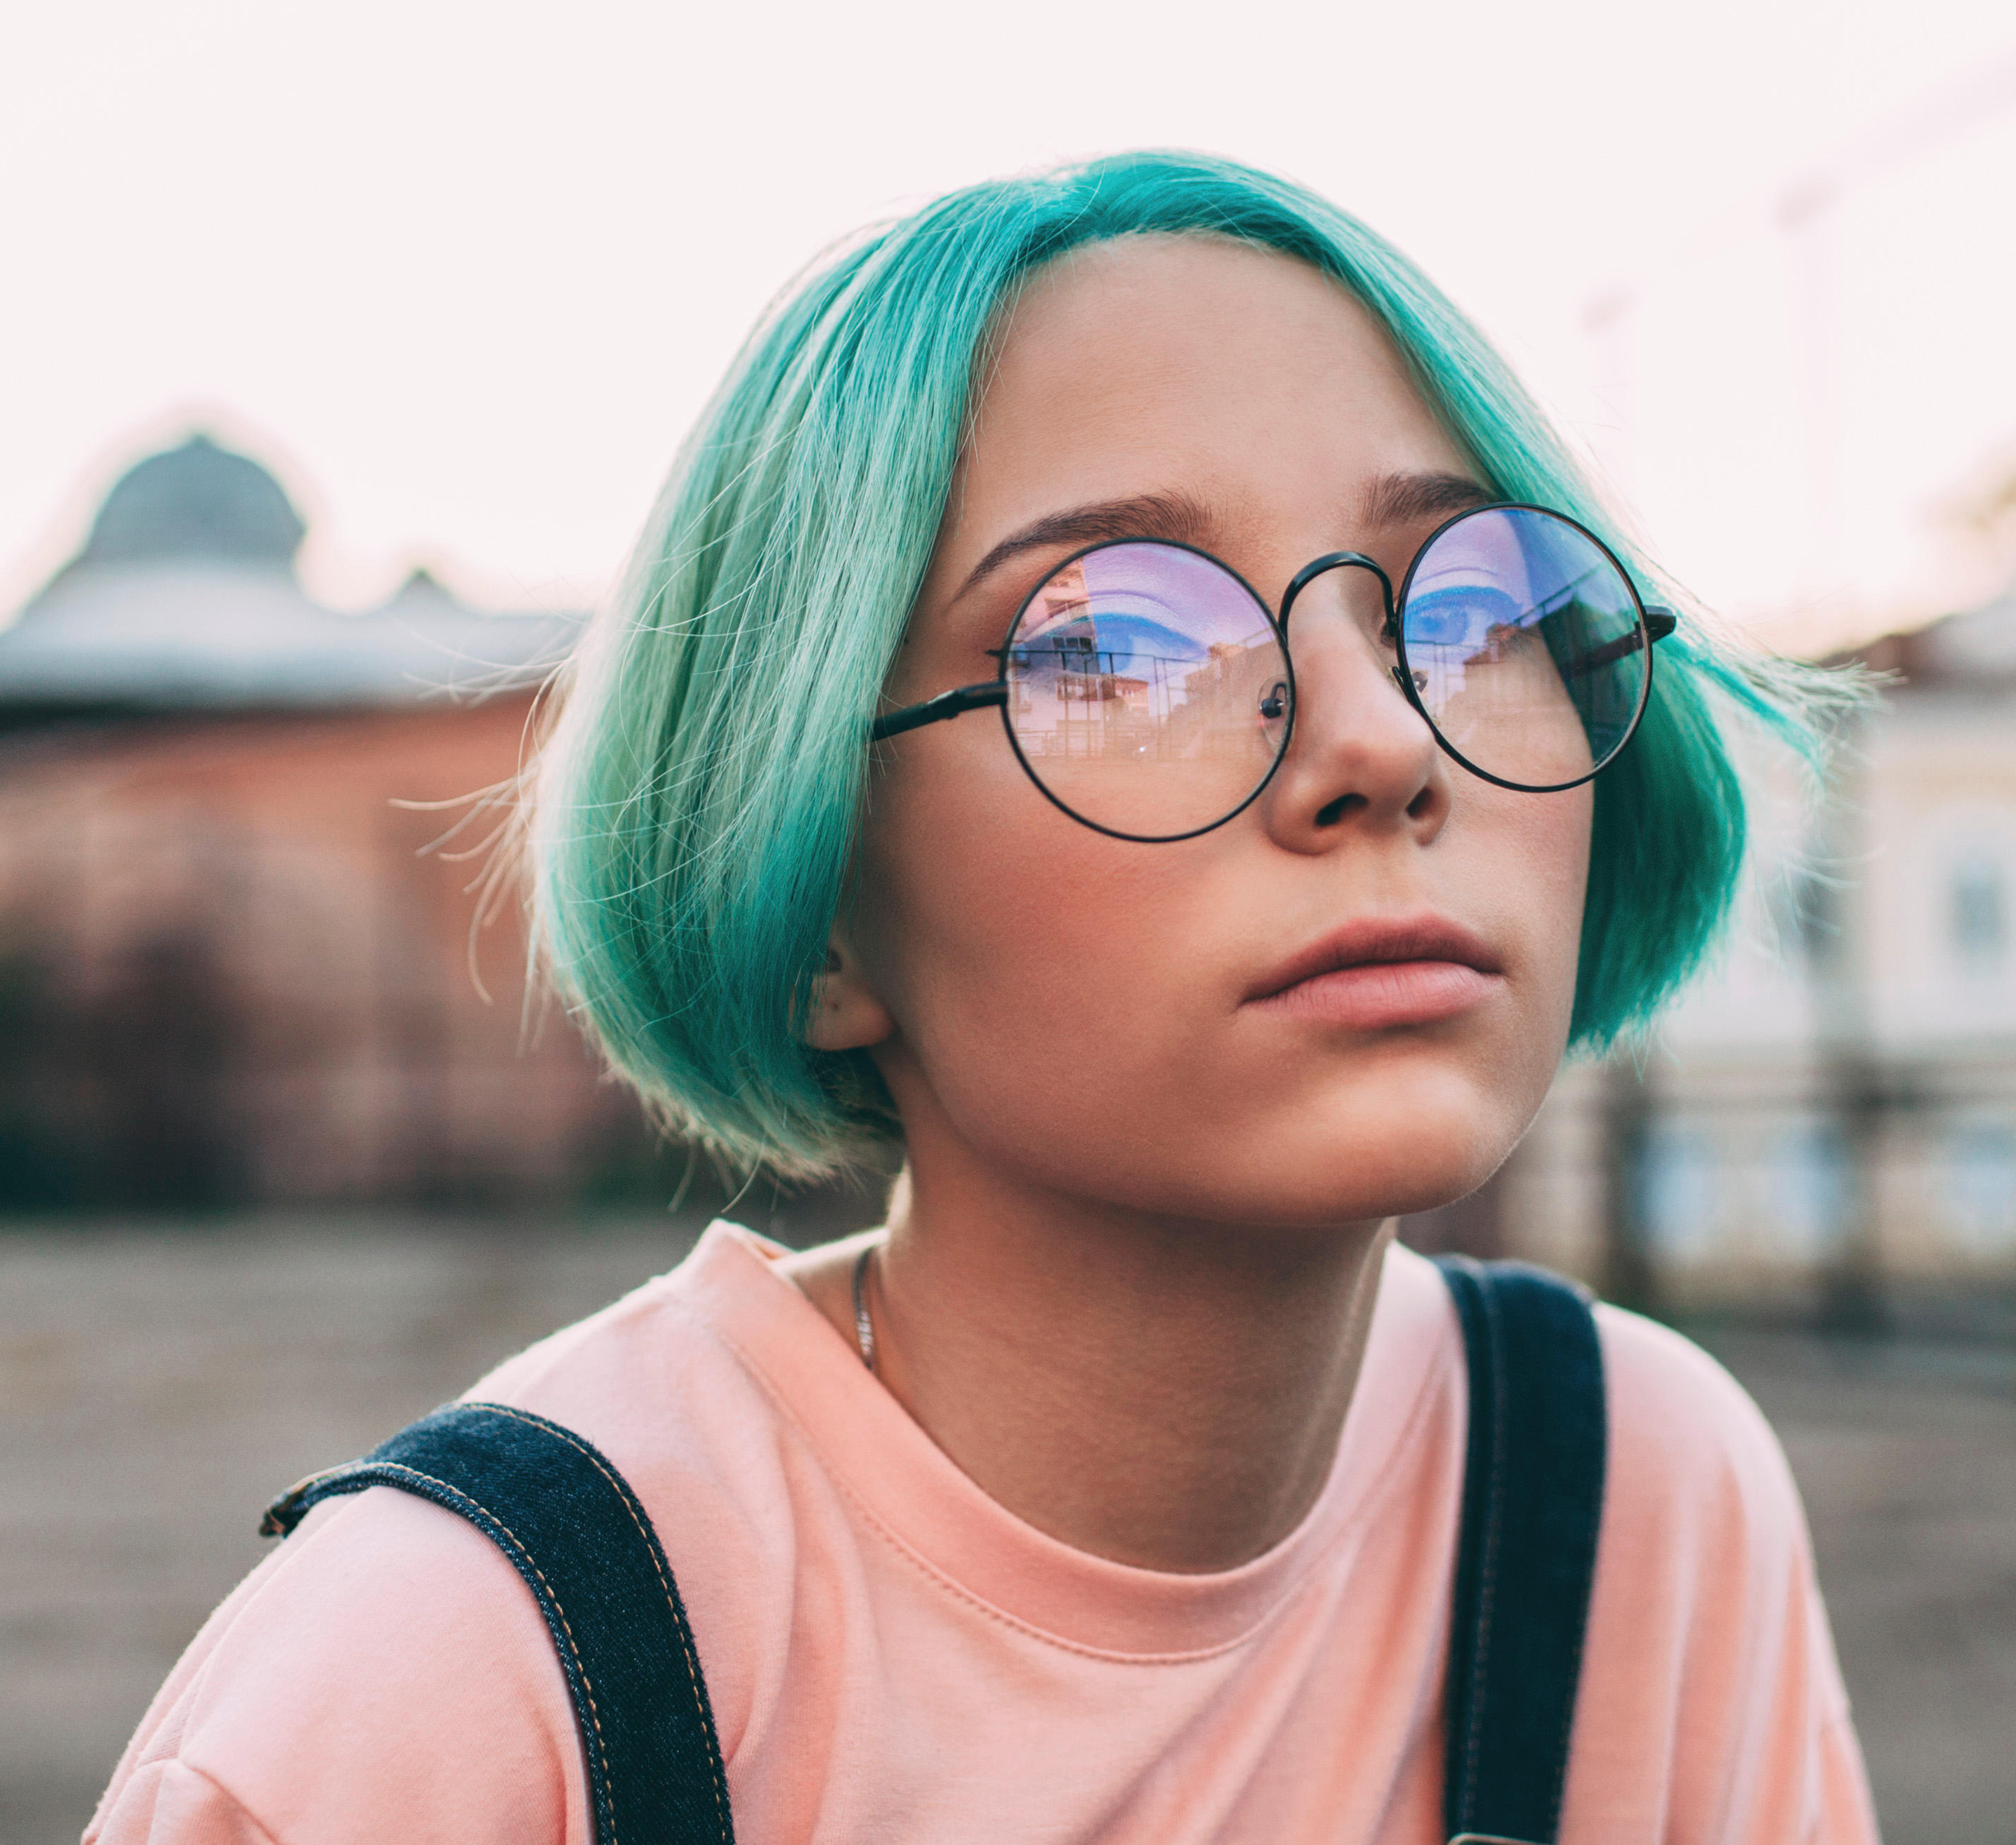 Girl with Blue Hair and Glasses